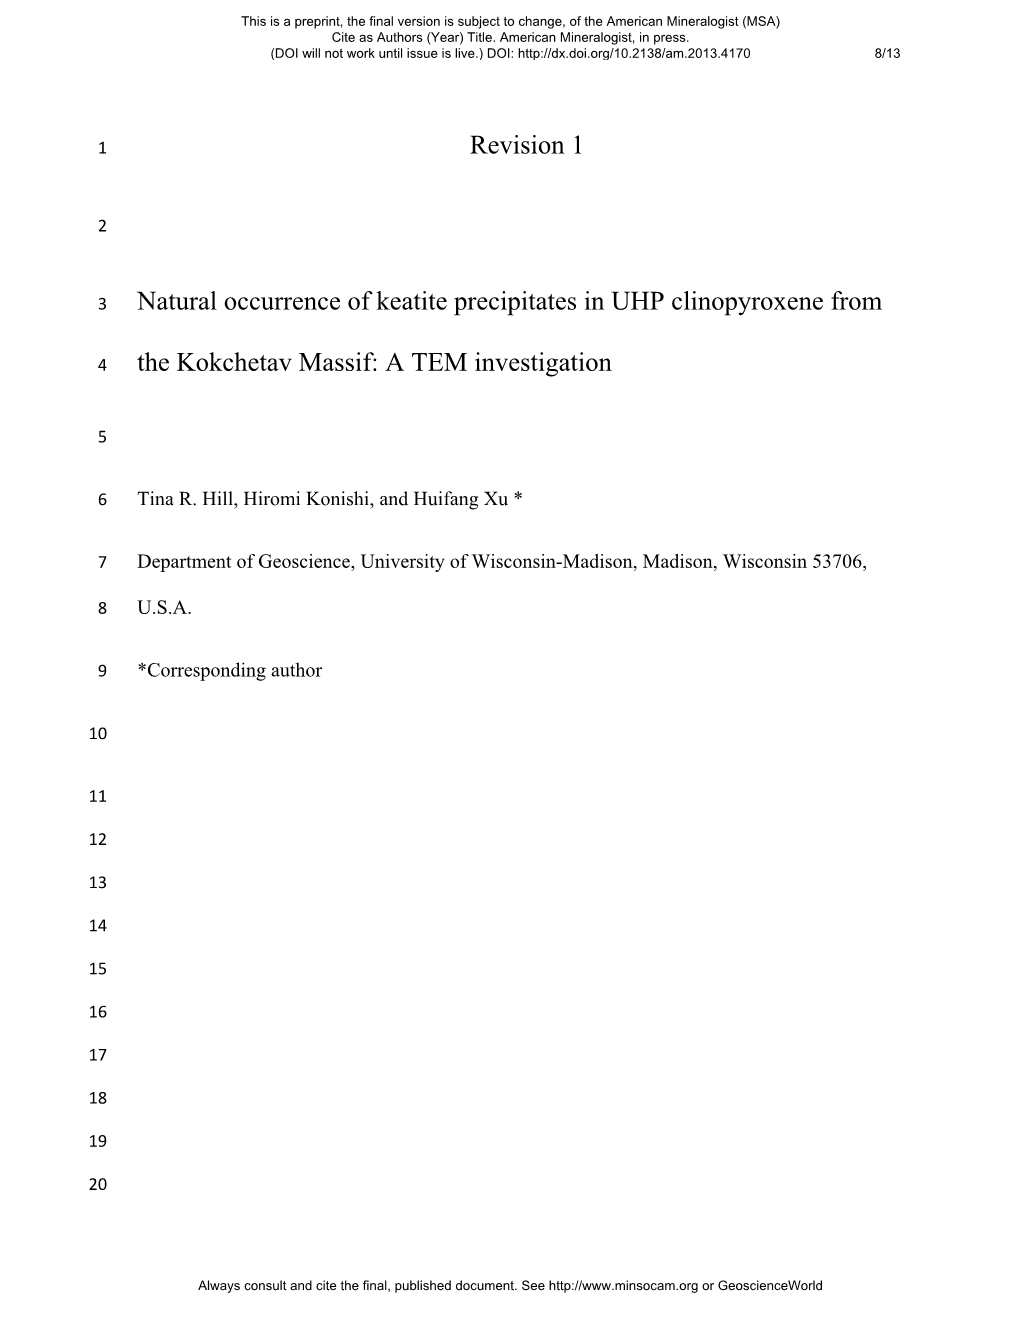 Revision 1 Natural Occurrence of Keatite Precipitates in UHP